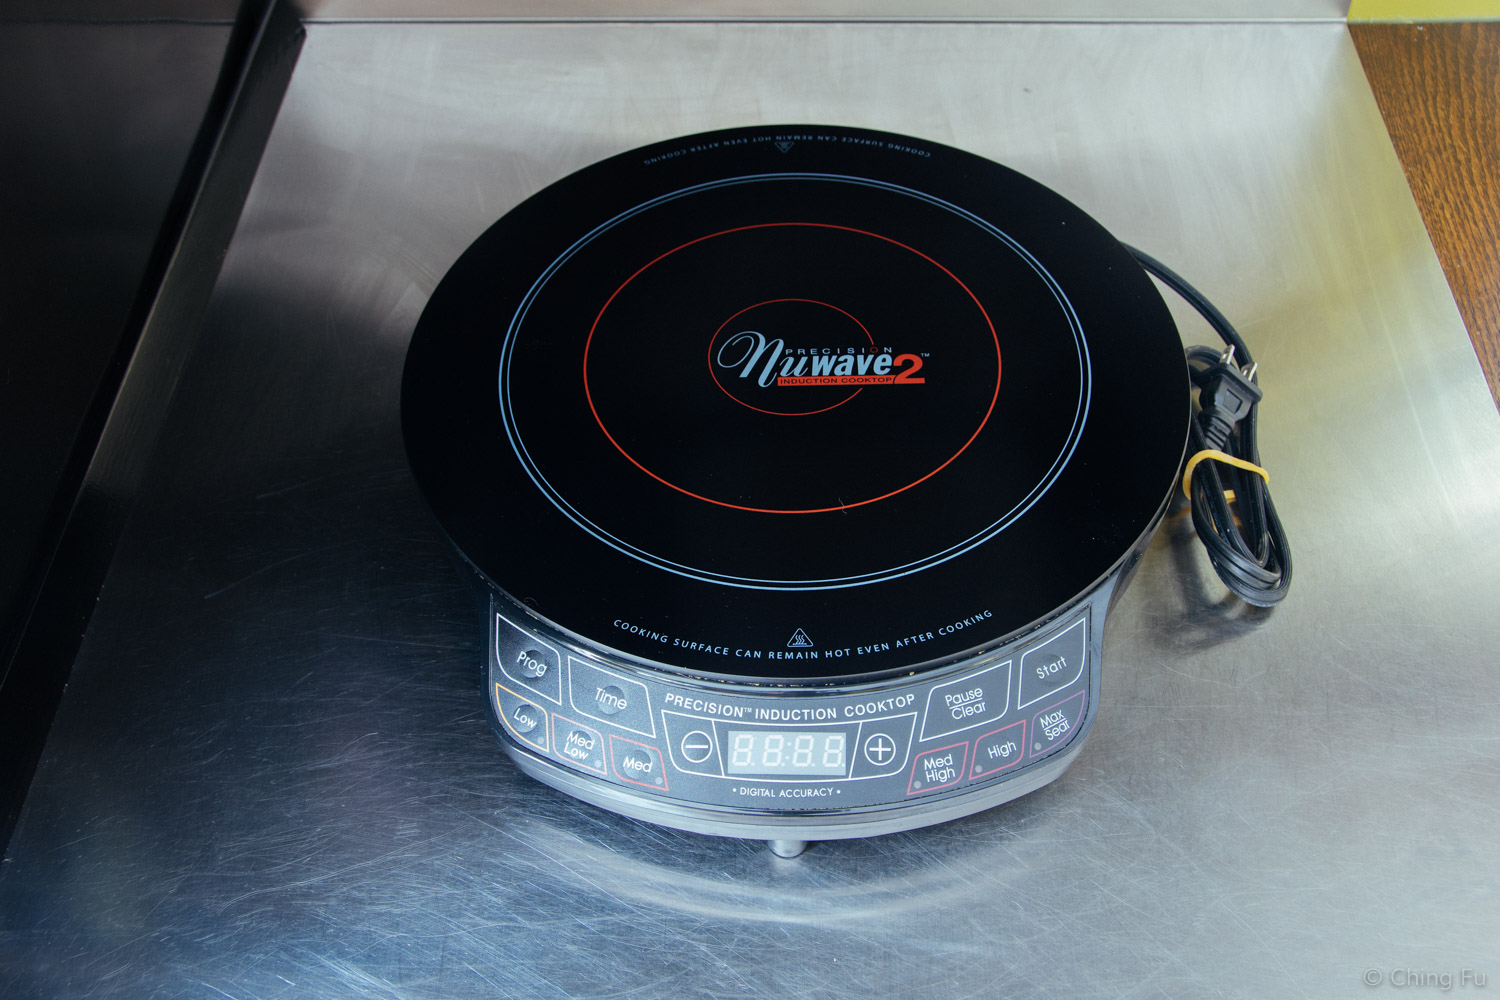 NuWave Induction Cooktop - Product Review